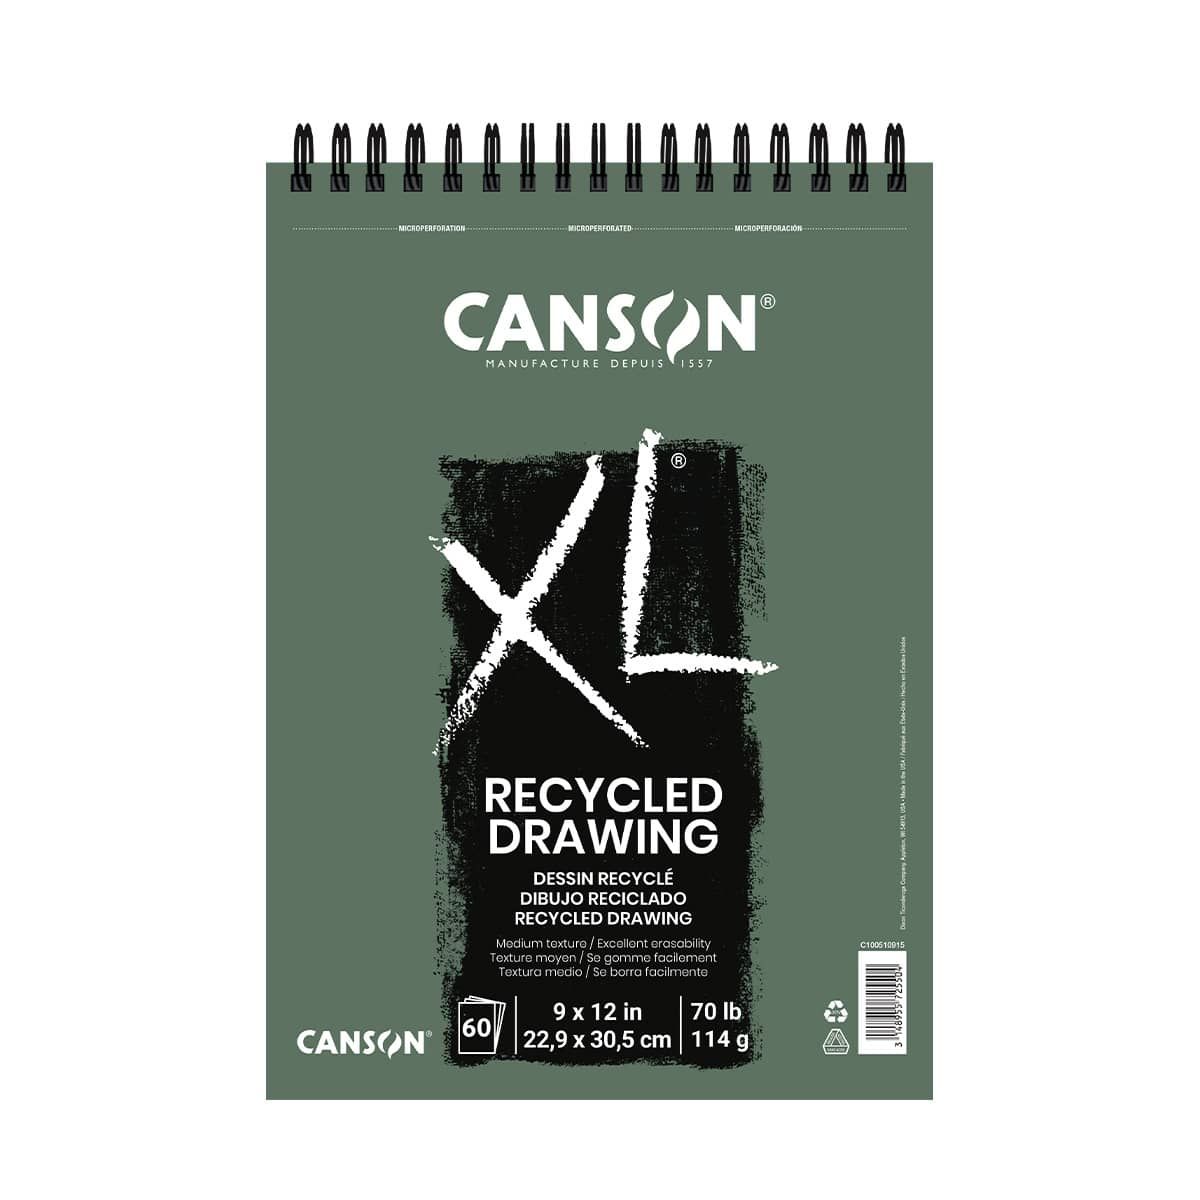 Canson Disposable Paint Palette Pad Treated Paper 40 Sheets 9 x 12 Inch